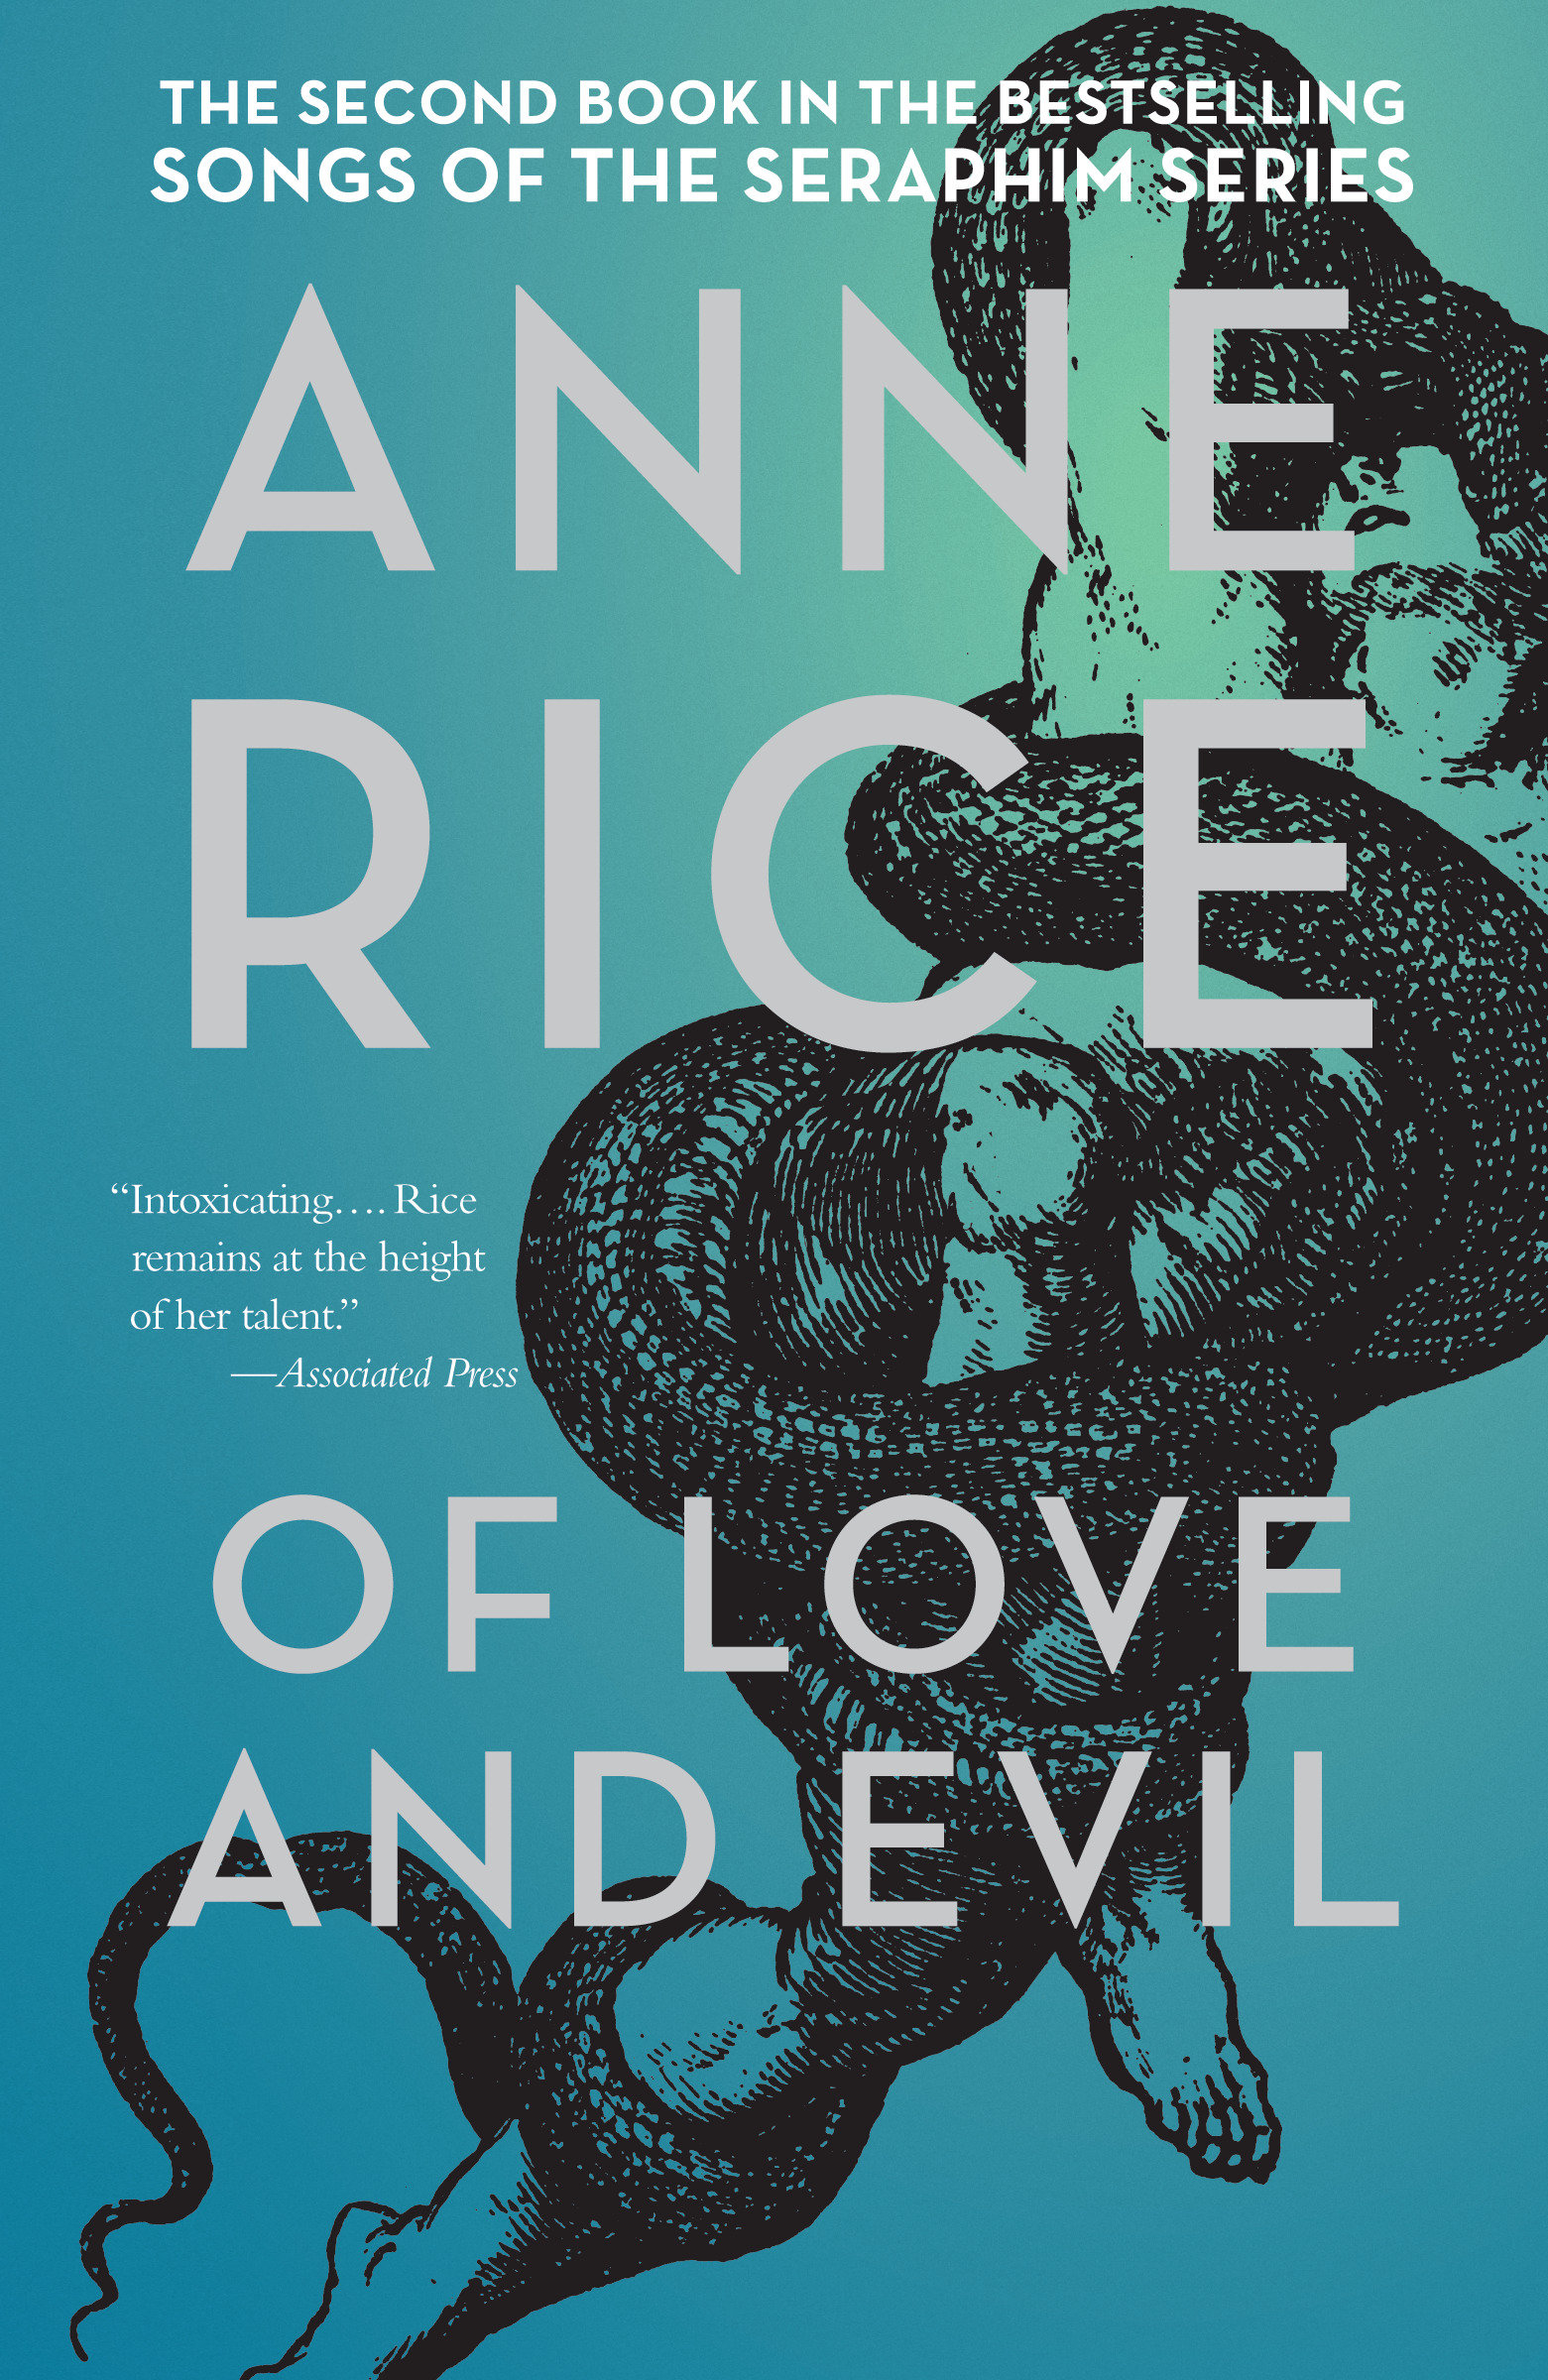 Of love and evil cover image